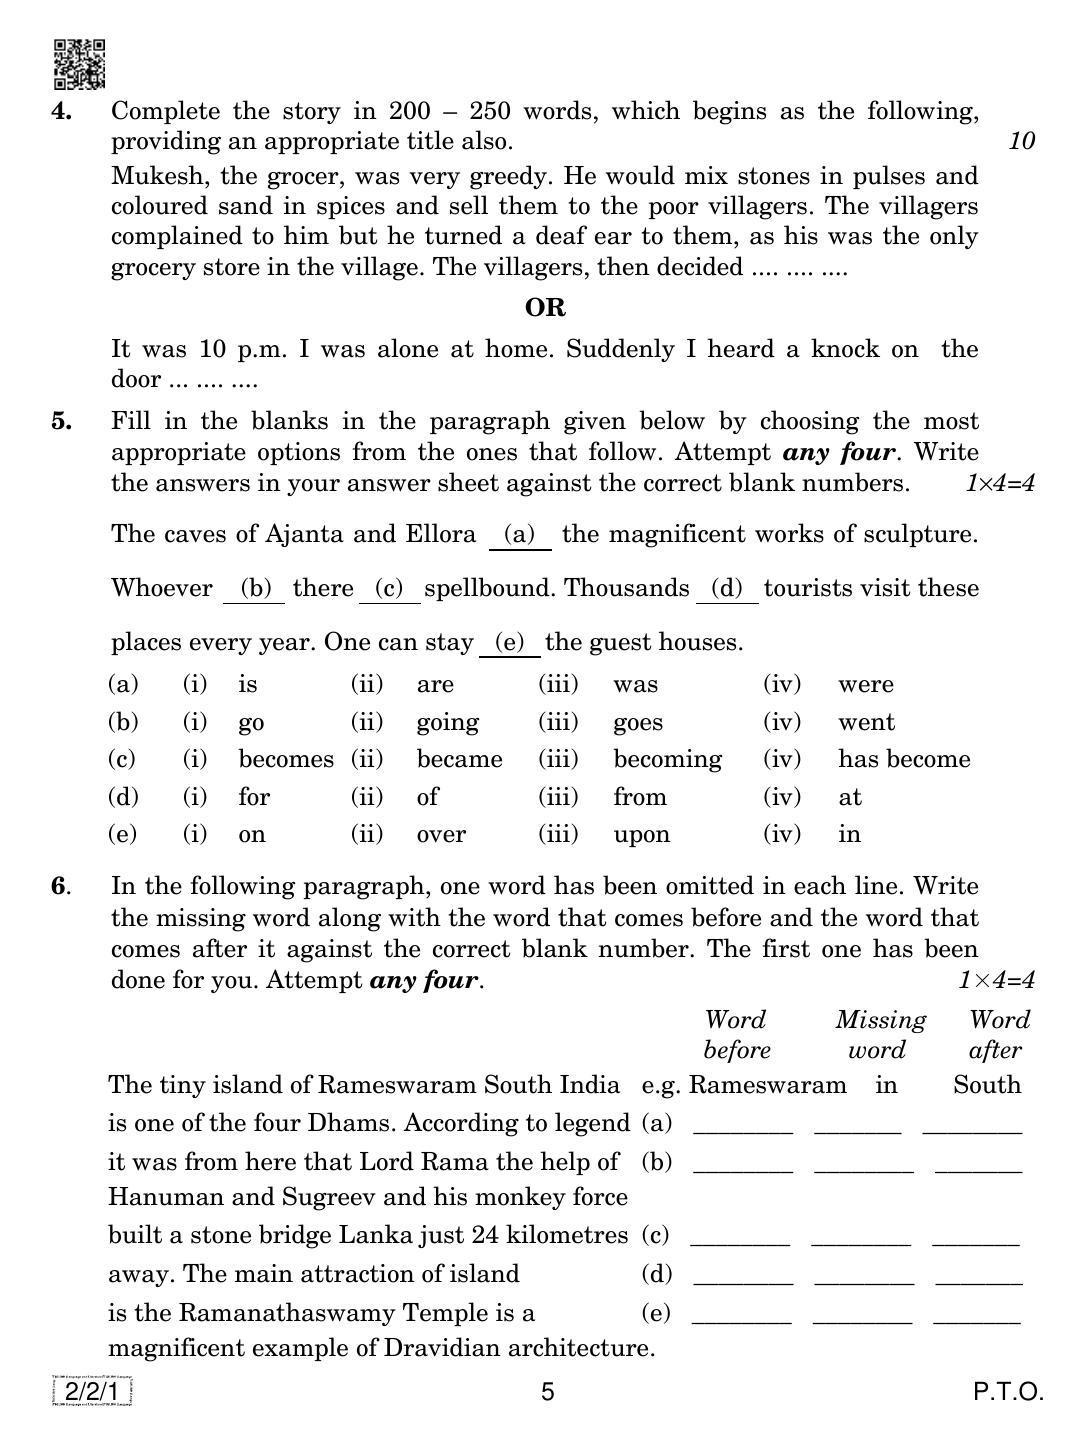 CBSE Class 10 2-2-1 ENGLISH LANGUAGE AND LETERATURE 2019 Question Paper - Page 5